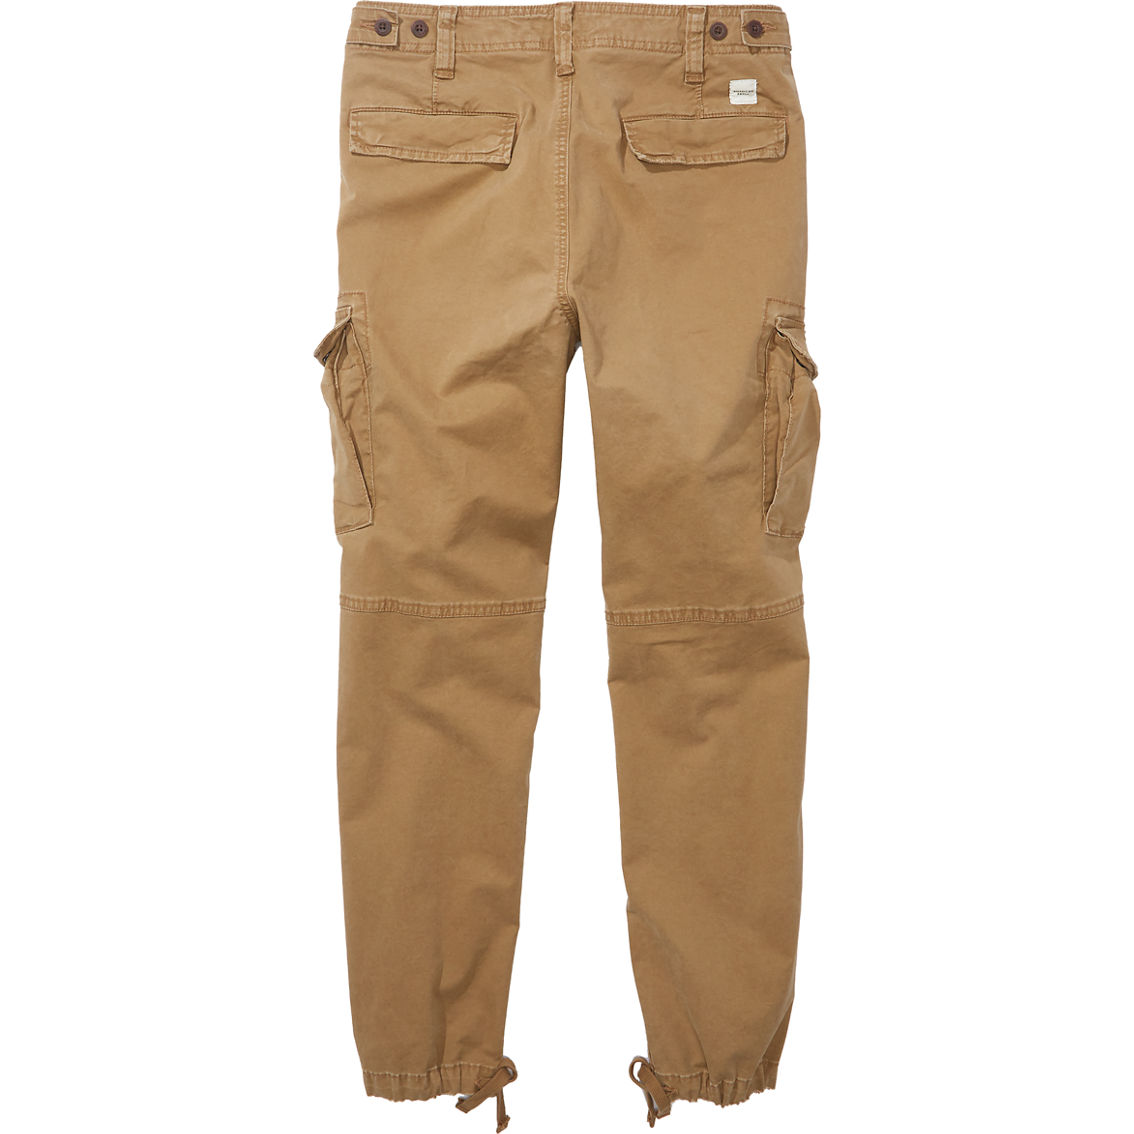 American Eagle Flex Slim Lived-In Cargo Pants - Image 5 of 5